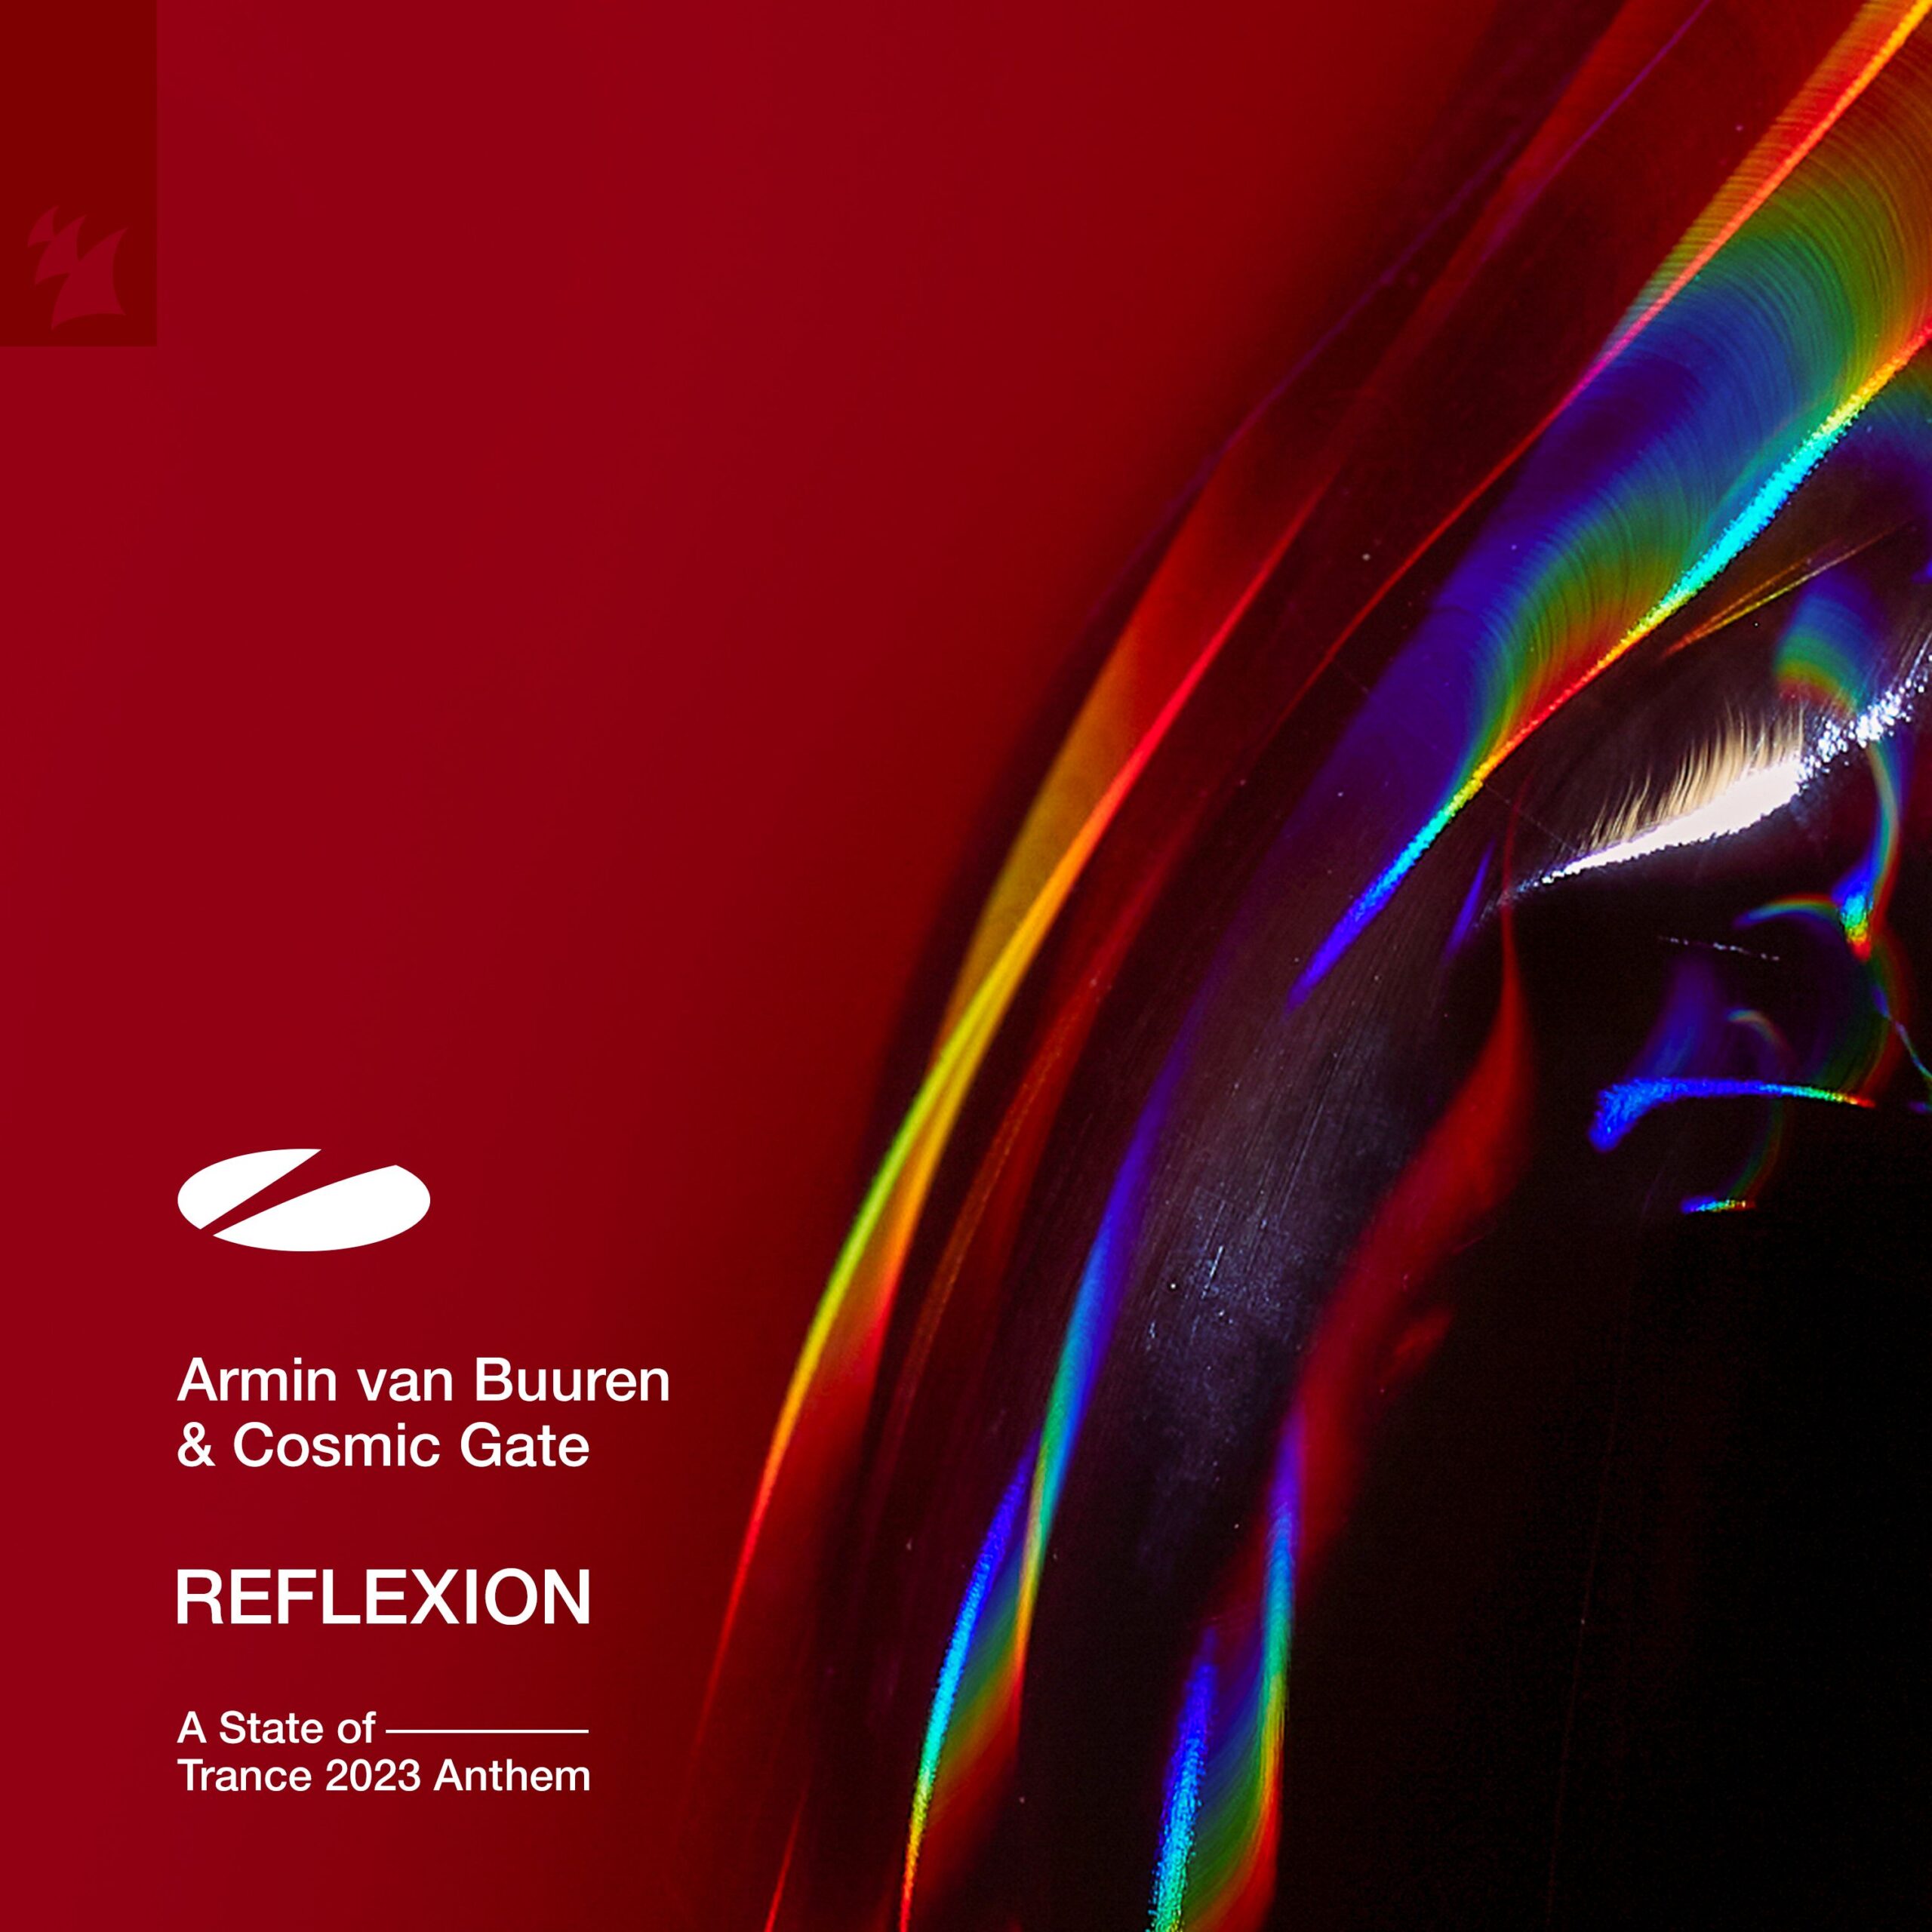 Armin van Buuren and Cosmic Gate presents REFLEXION on A State Of Trance